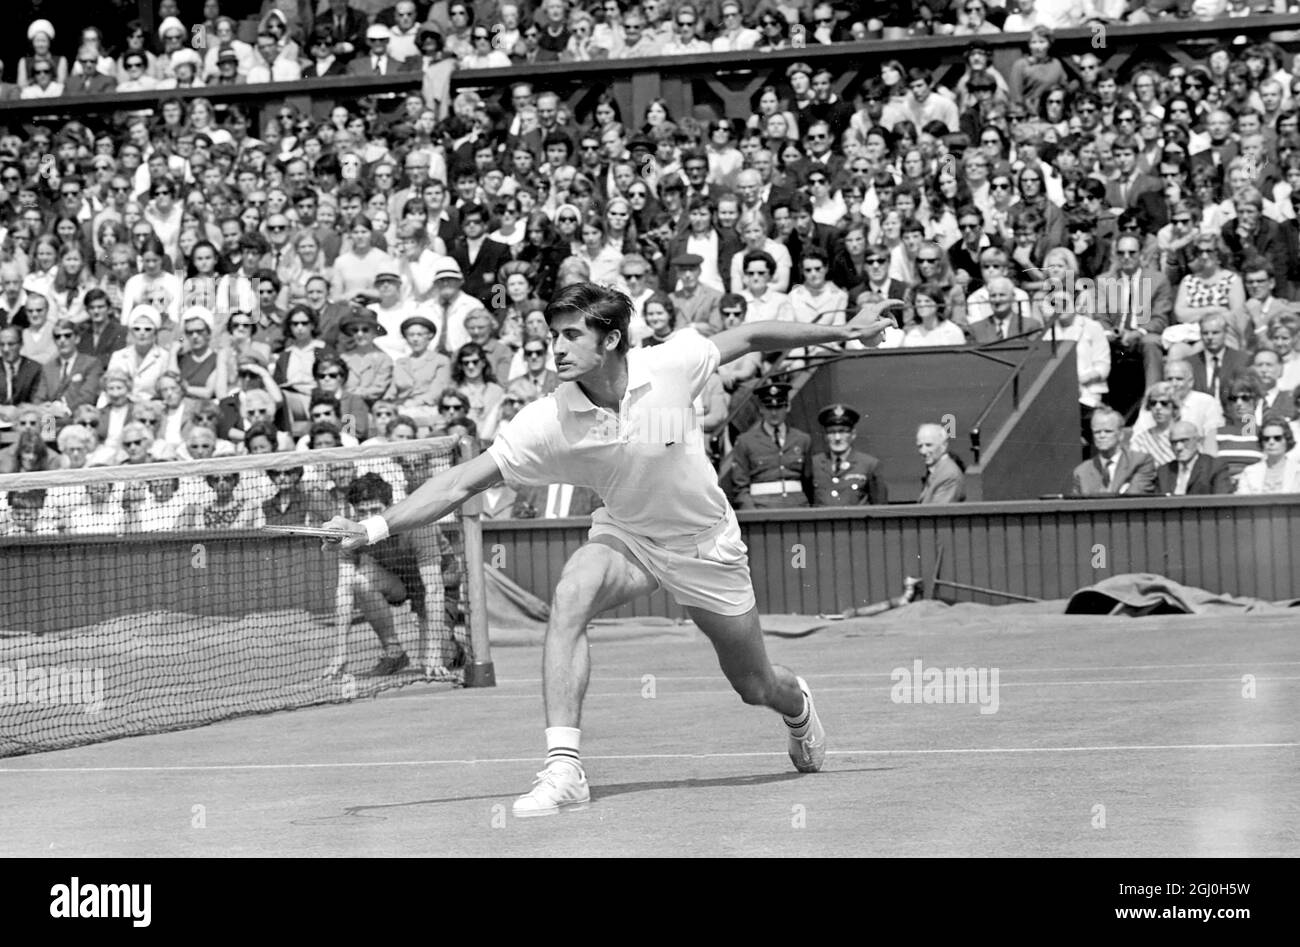 London: Charles Pasqarell, of Puerto Rico, in action against Pancho Gonzales, of Los Angeles, in the Mens Singles of the Wimbledon Tennis Championships. 25 June 1969 Stock Photo